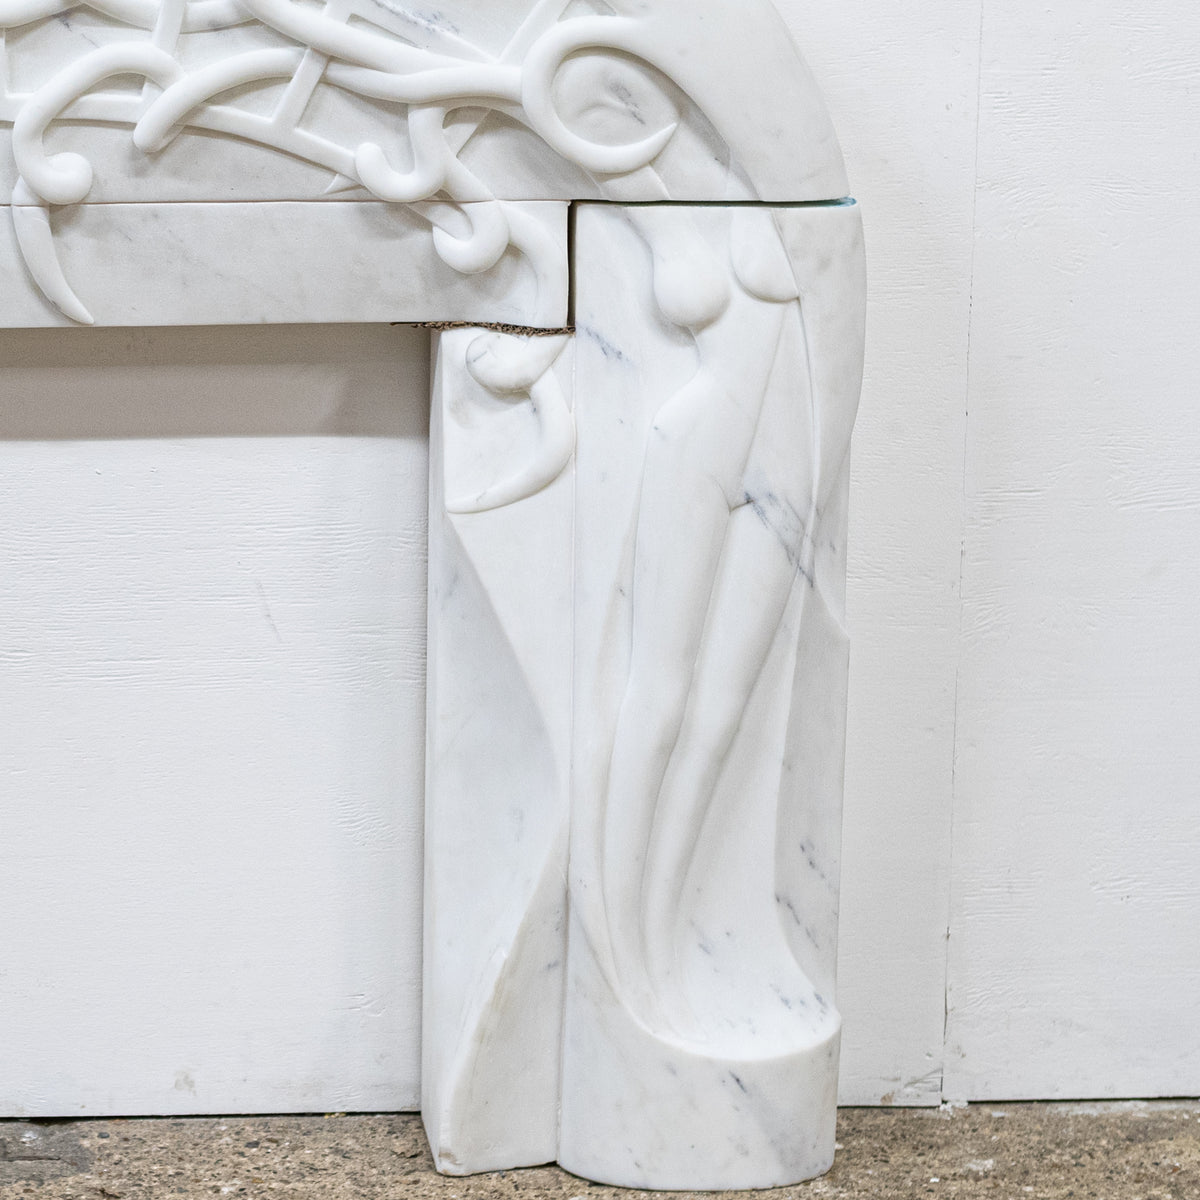 Rare Finely Carved Statuary Marble Chimneypiece | The Architectural Forum